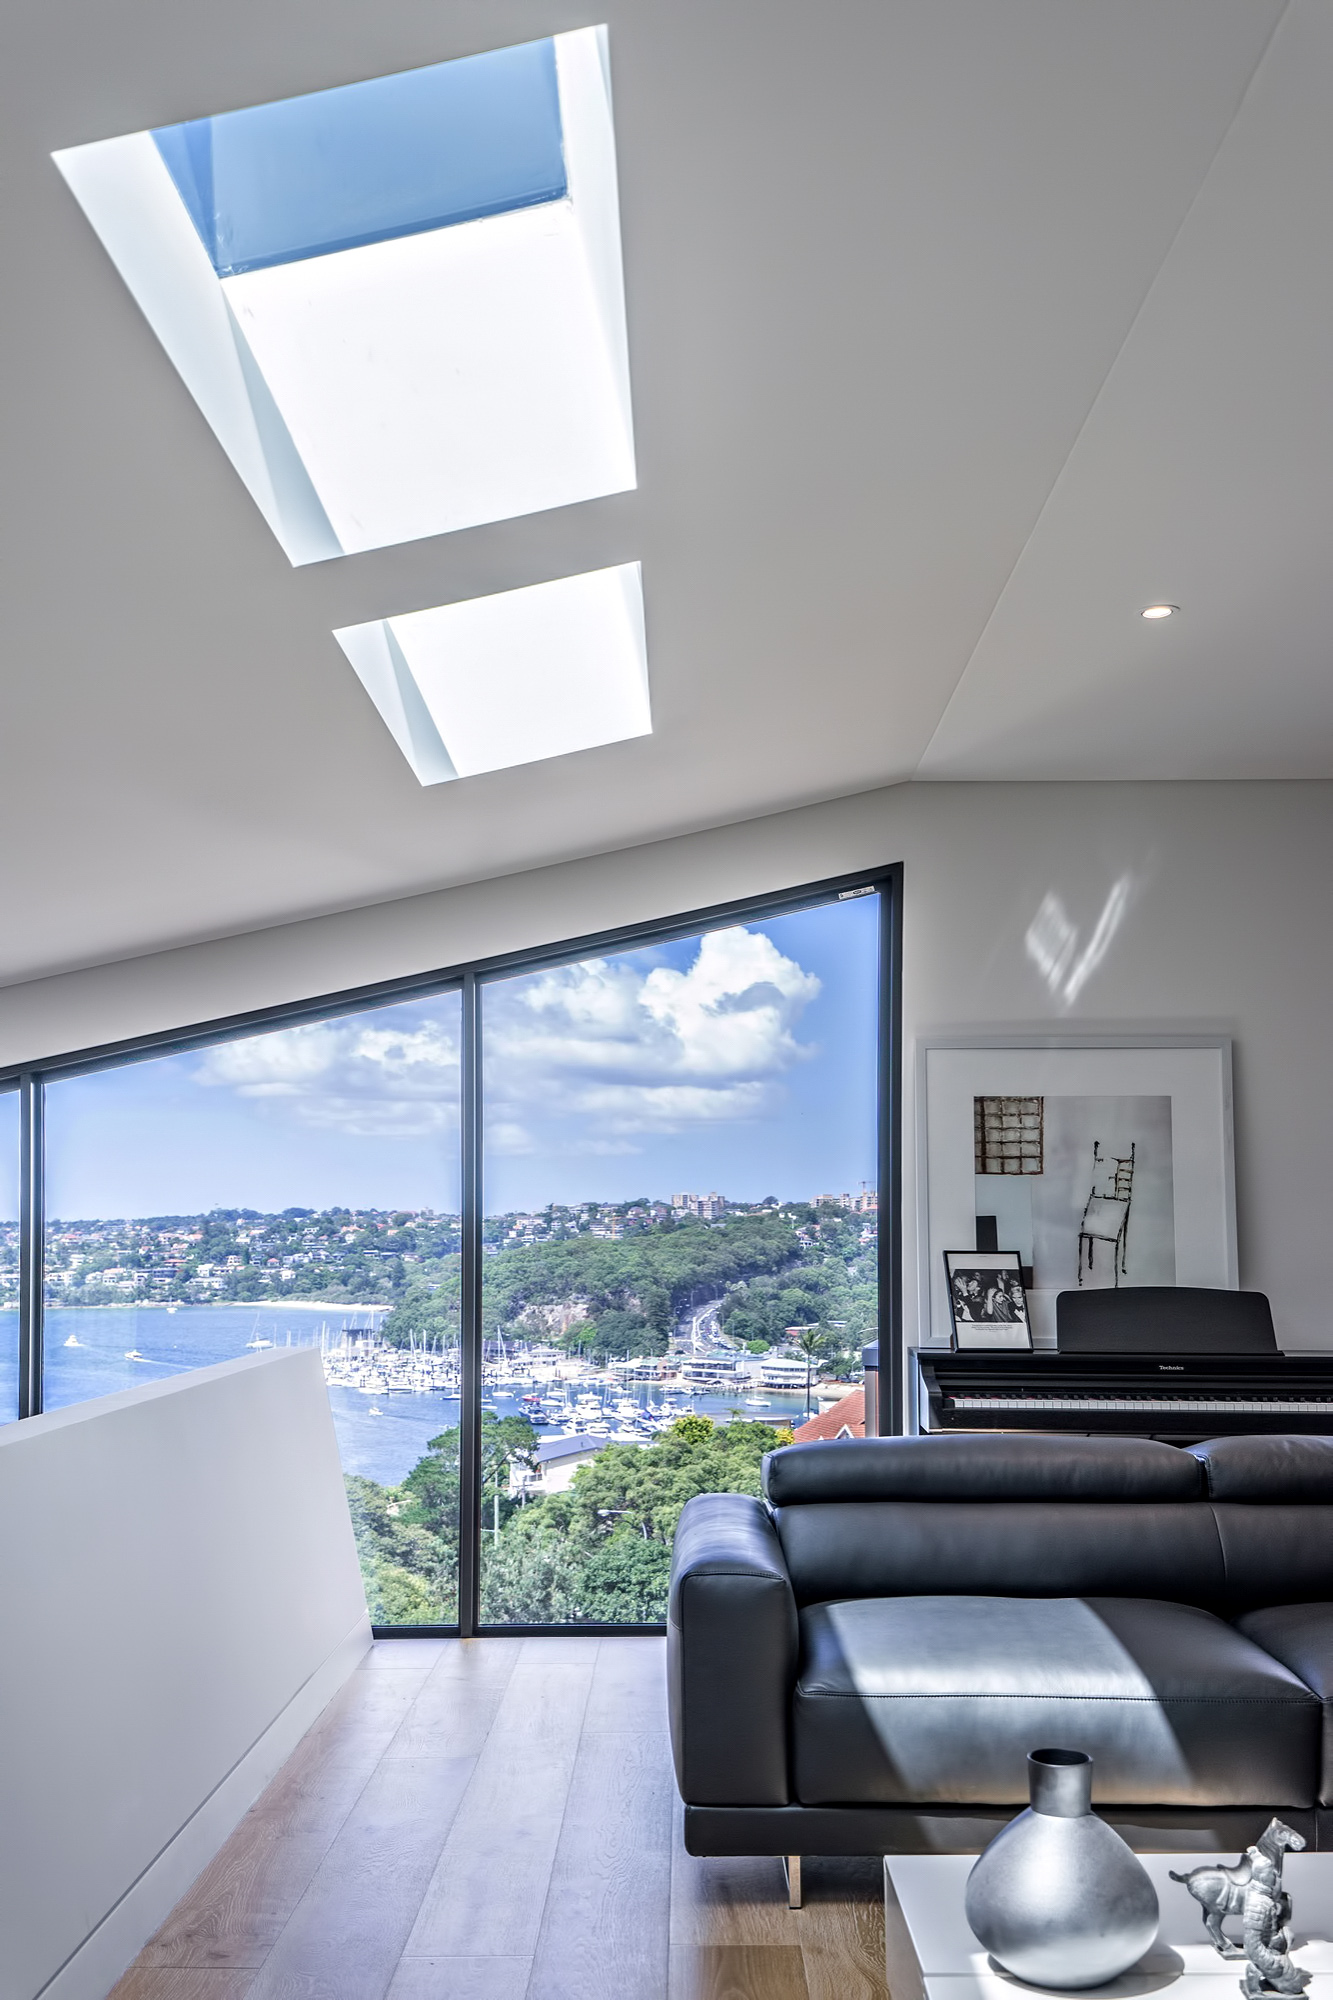 Seaforth House Residence – Sydney, New South Wales, Australia